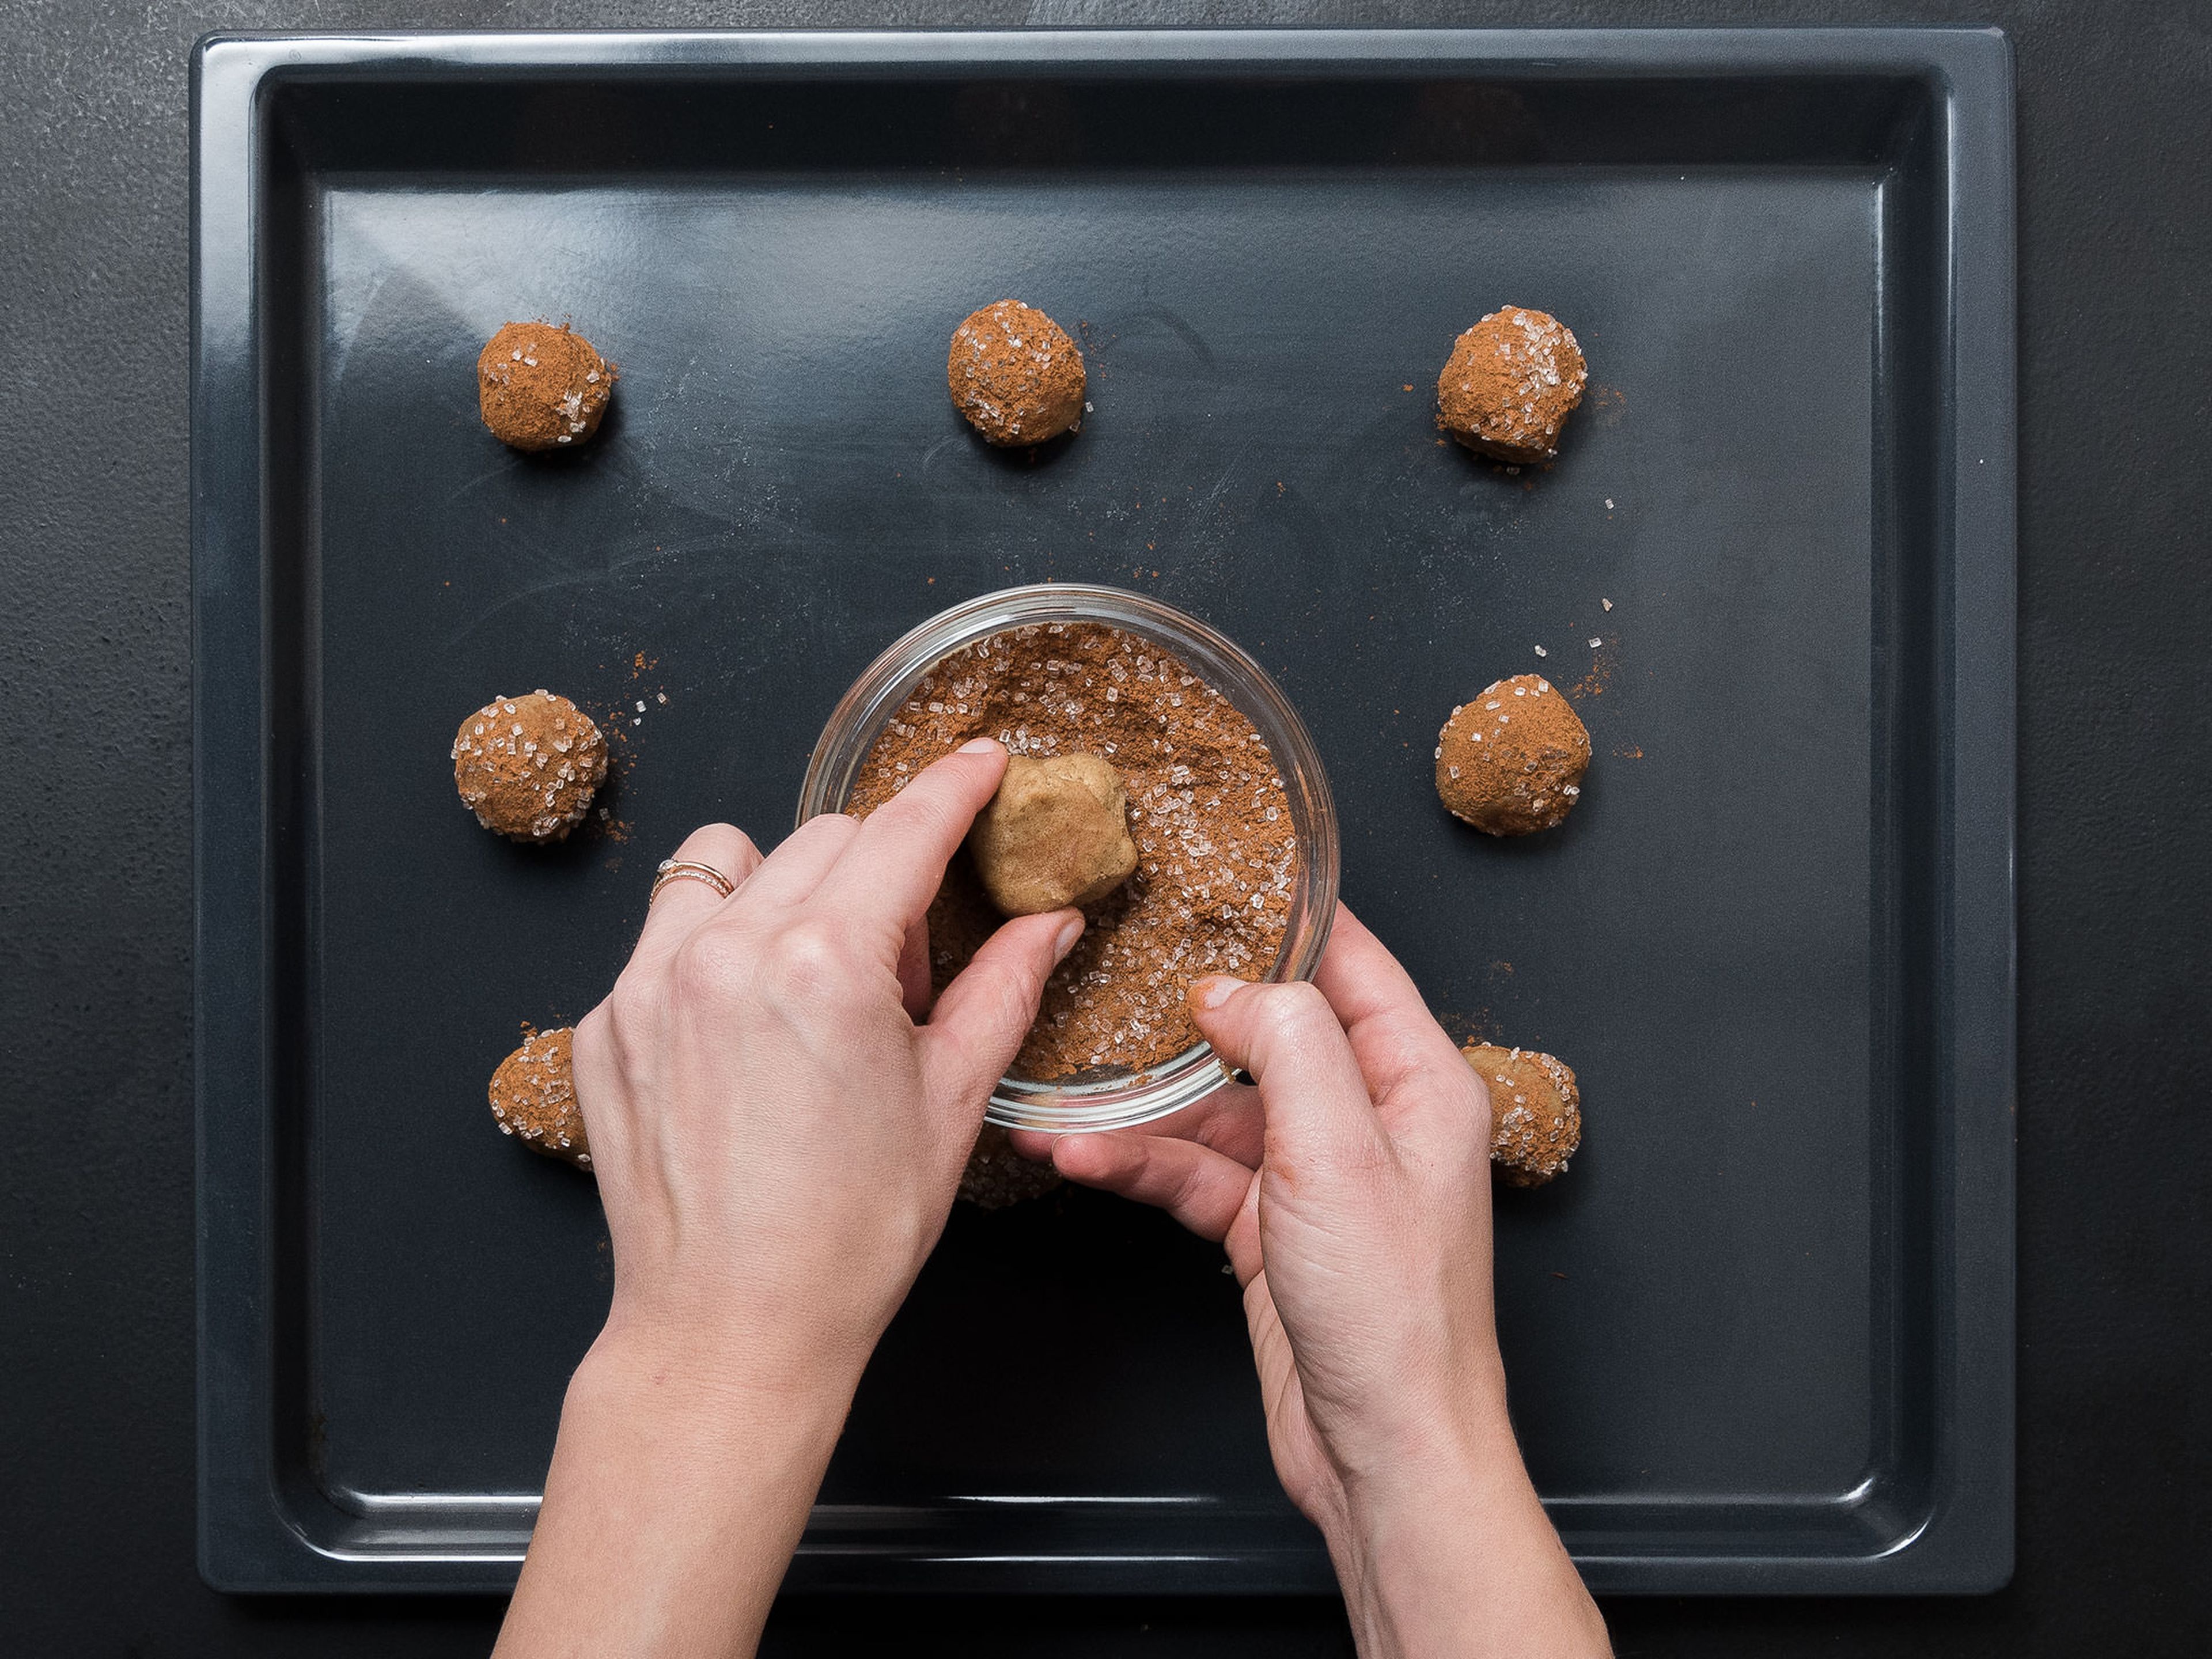 Preheat oven to 190°C/375°F and line a baking sheet with parchment paper, if needed. Using a teaspoon, scoop dough into equal-sized small balls. Roll in cinnamon sugar and transfer to baking sheet. Bake for approx. 8 – 10 min., until golden brown. Allow cookies to cool completely.